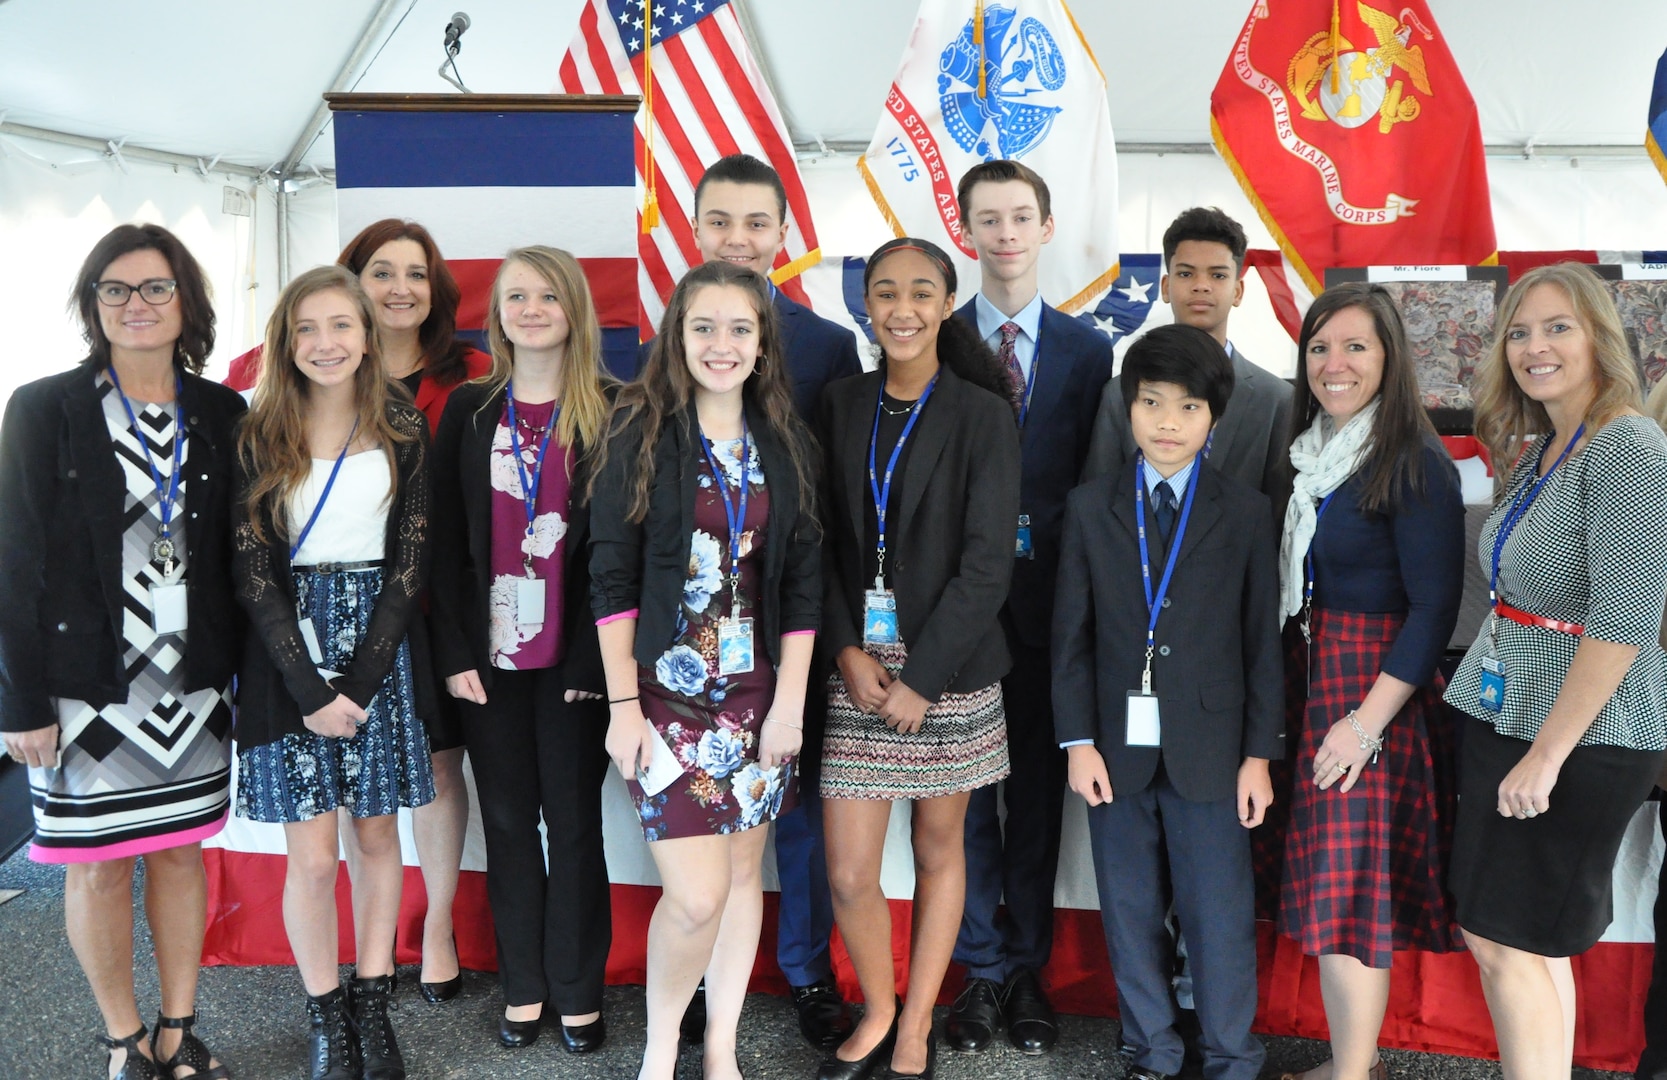 IMAGE: DAHLGREN, Va. (Nov. 1, 2018) – Spotsylvania Post Oak Middle School science, technology, engineering, and mathematics (STEM) students, their teachers, and a Naval Surface Warfare Center Dahlgren Division (NSWCDD) STEM mentor are pictured prior to a ribbon-cutting ceremony for the Navy’s new Missile Support Facility. The building features state-of-the-art labs, offices, and equipment for more than 300 NSWCDD Strategic and Computing Systems Department scientists, engineers, and technical experts who develop, test, and maintain the Submarine Launched Ballistic Missile fire control and mission planning software.  (U.S. Navy photo/Released)